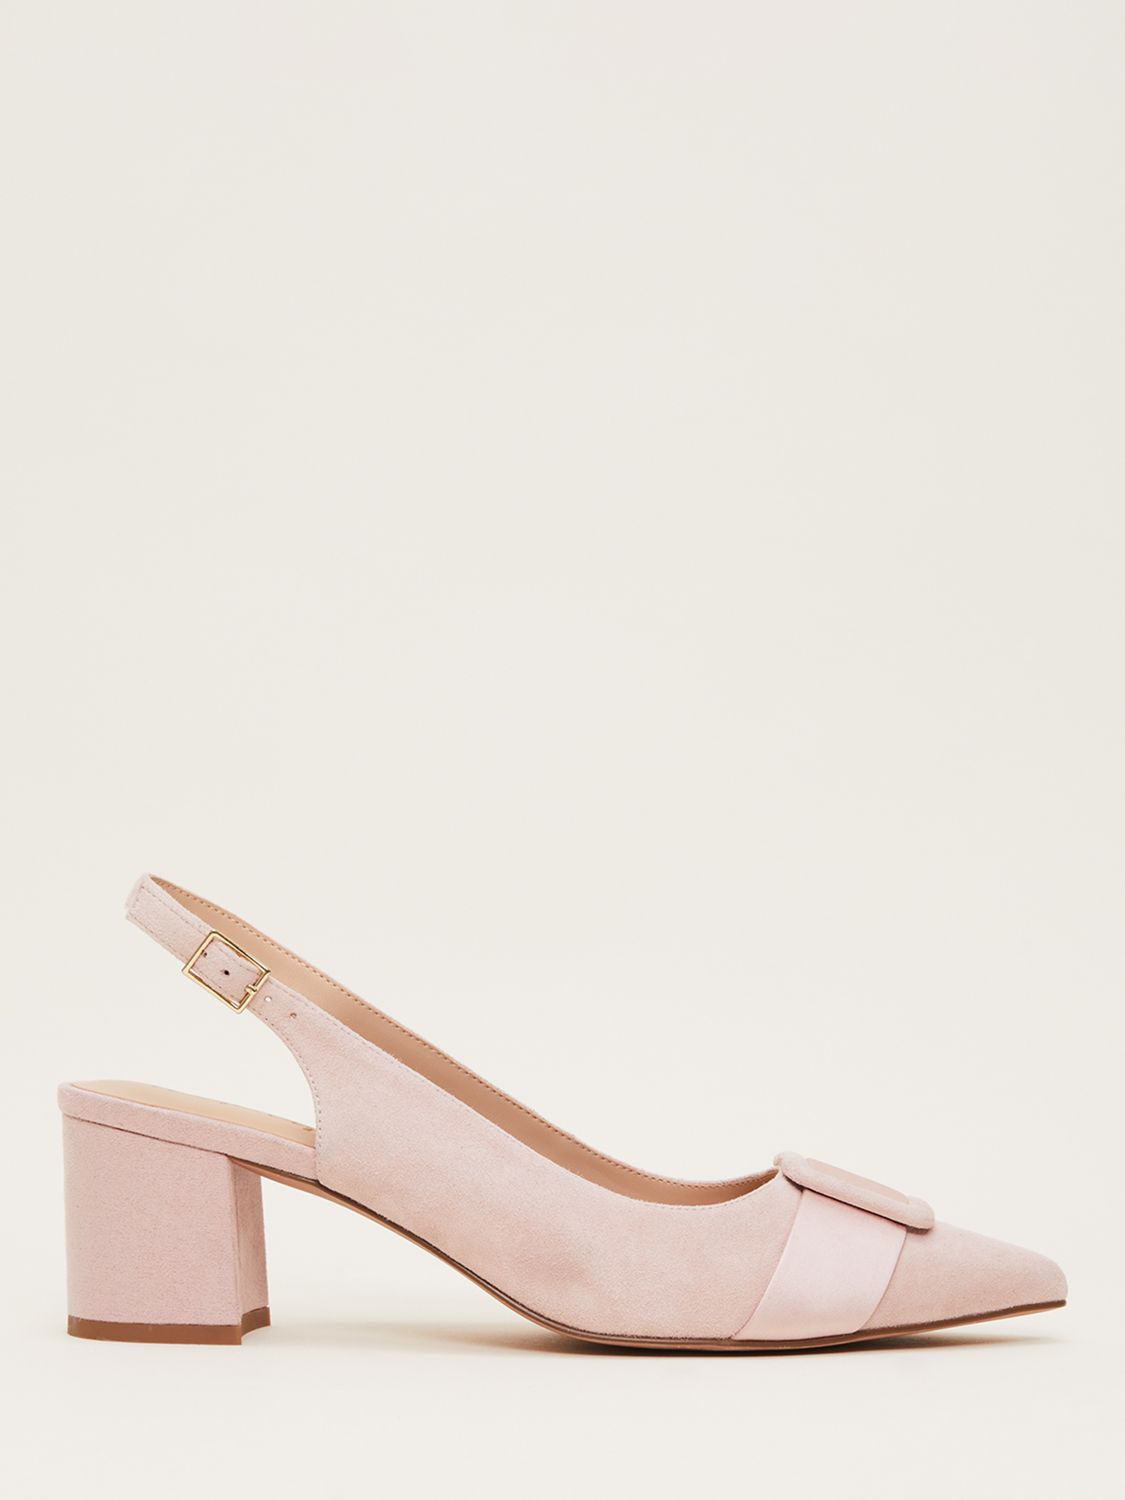 Phase Eight Suede Buckle Block Heel Court Shoes, Antique Rose